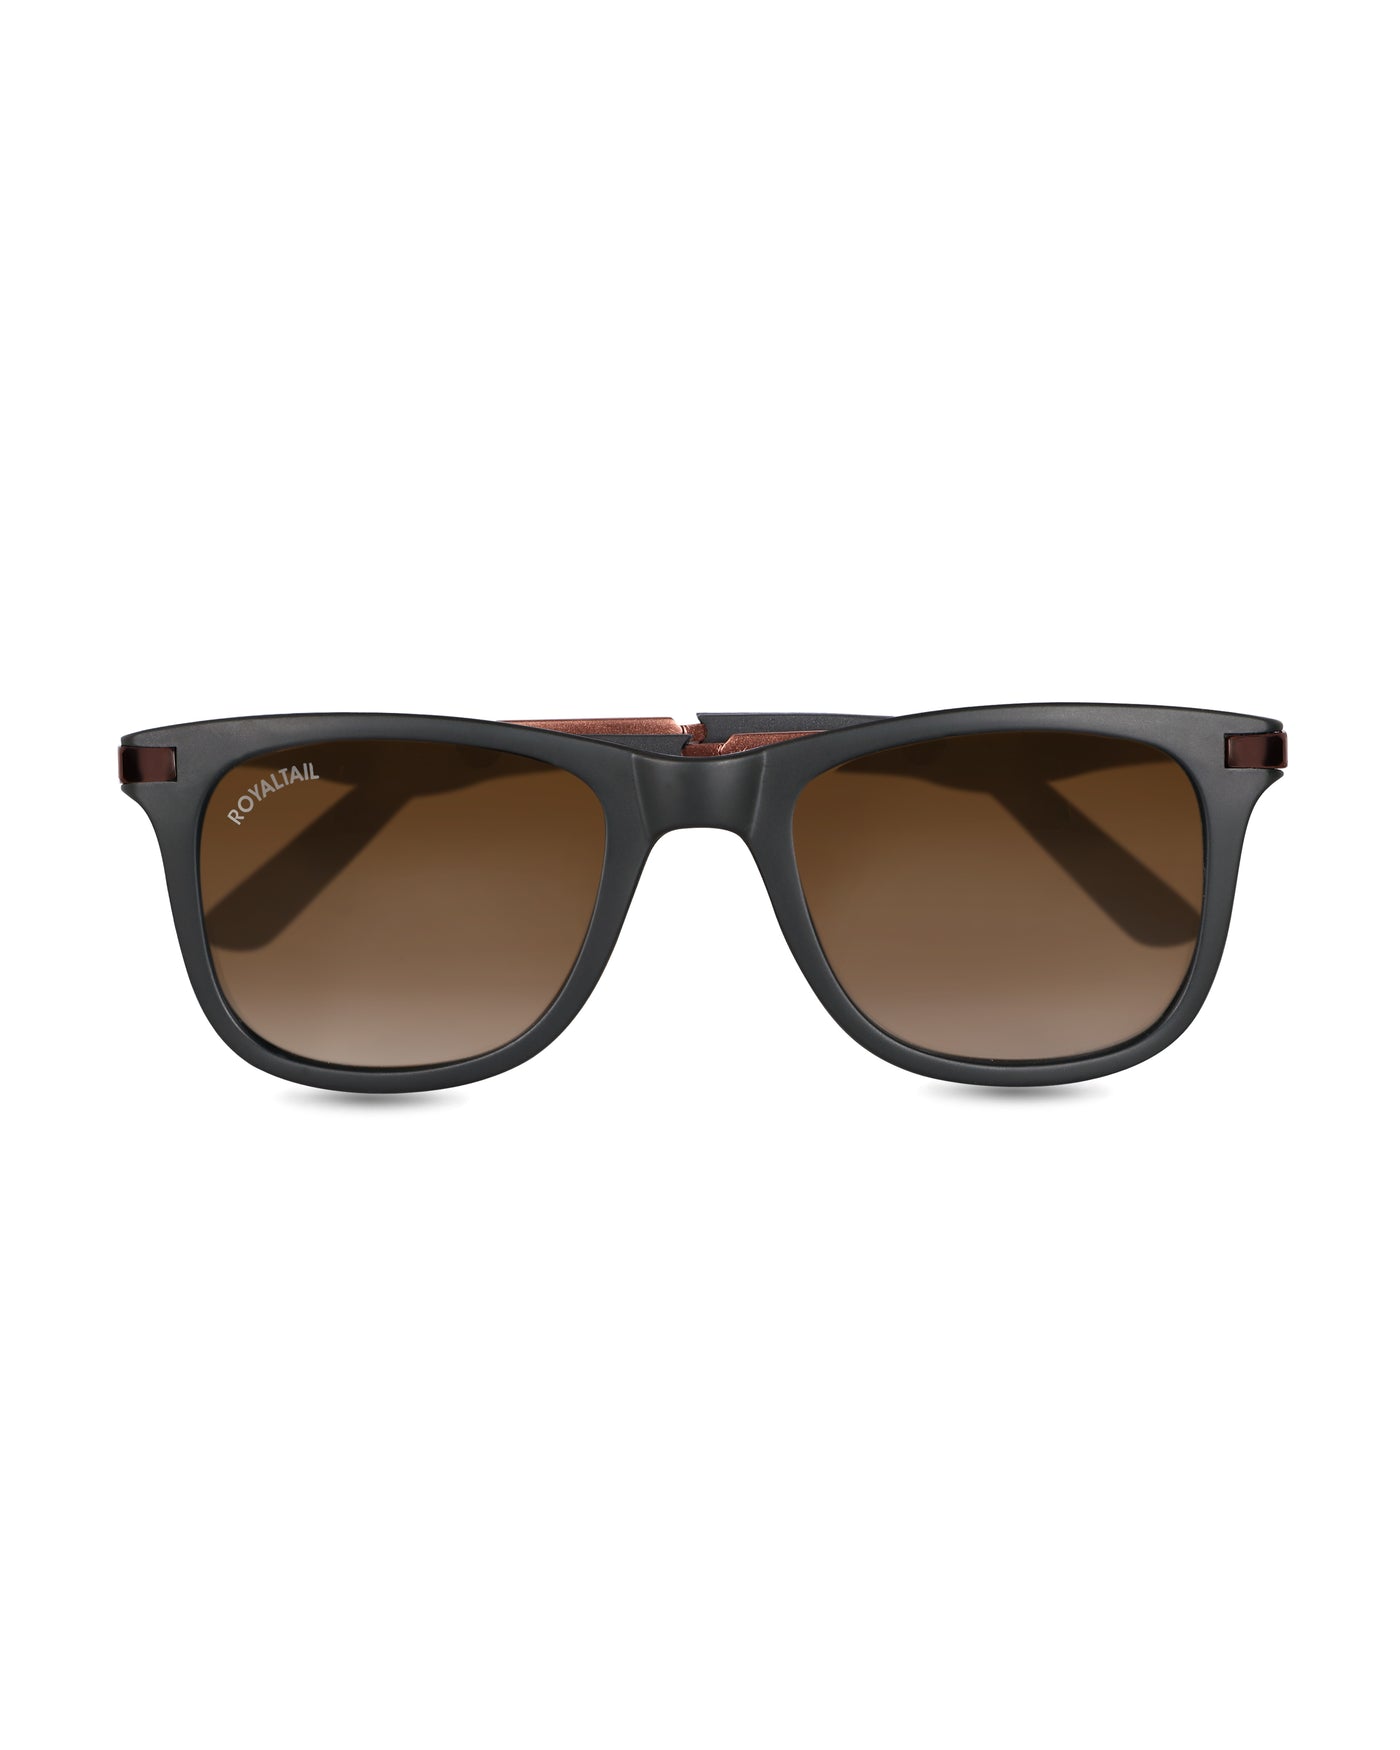 Brown Glass and Brown Frame Square Helmatta 4287 Edition Sunglasses - Royaltail